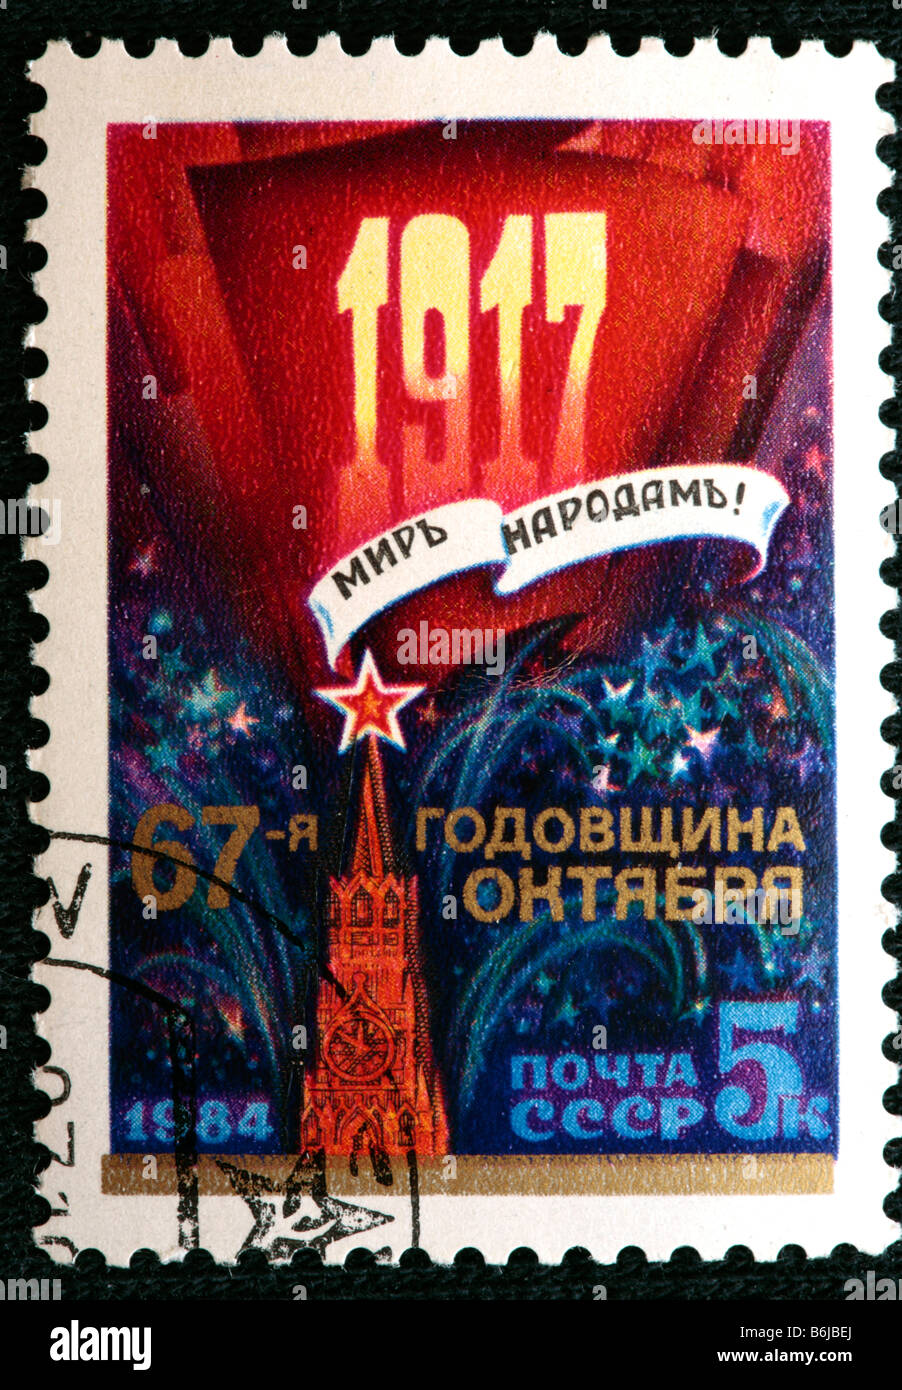 67 years of Russian October revolution, postage stamp, USSR, 1984 Stock Photo